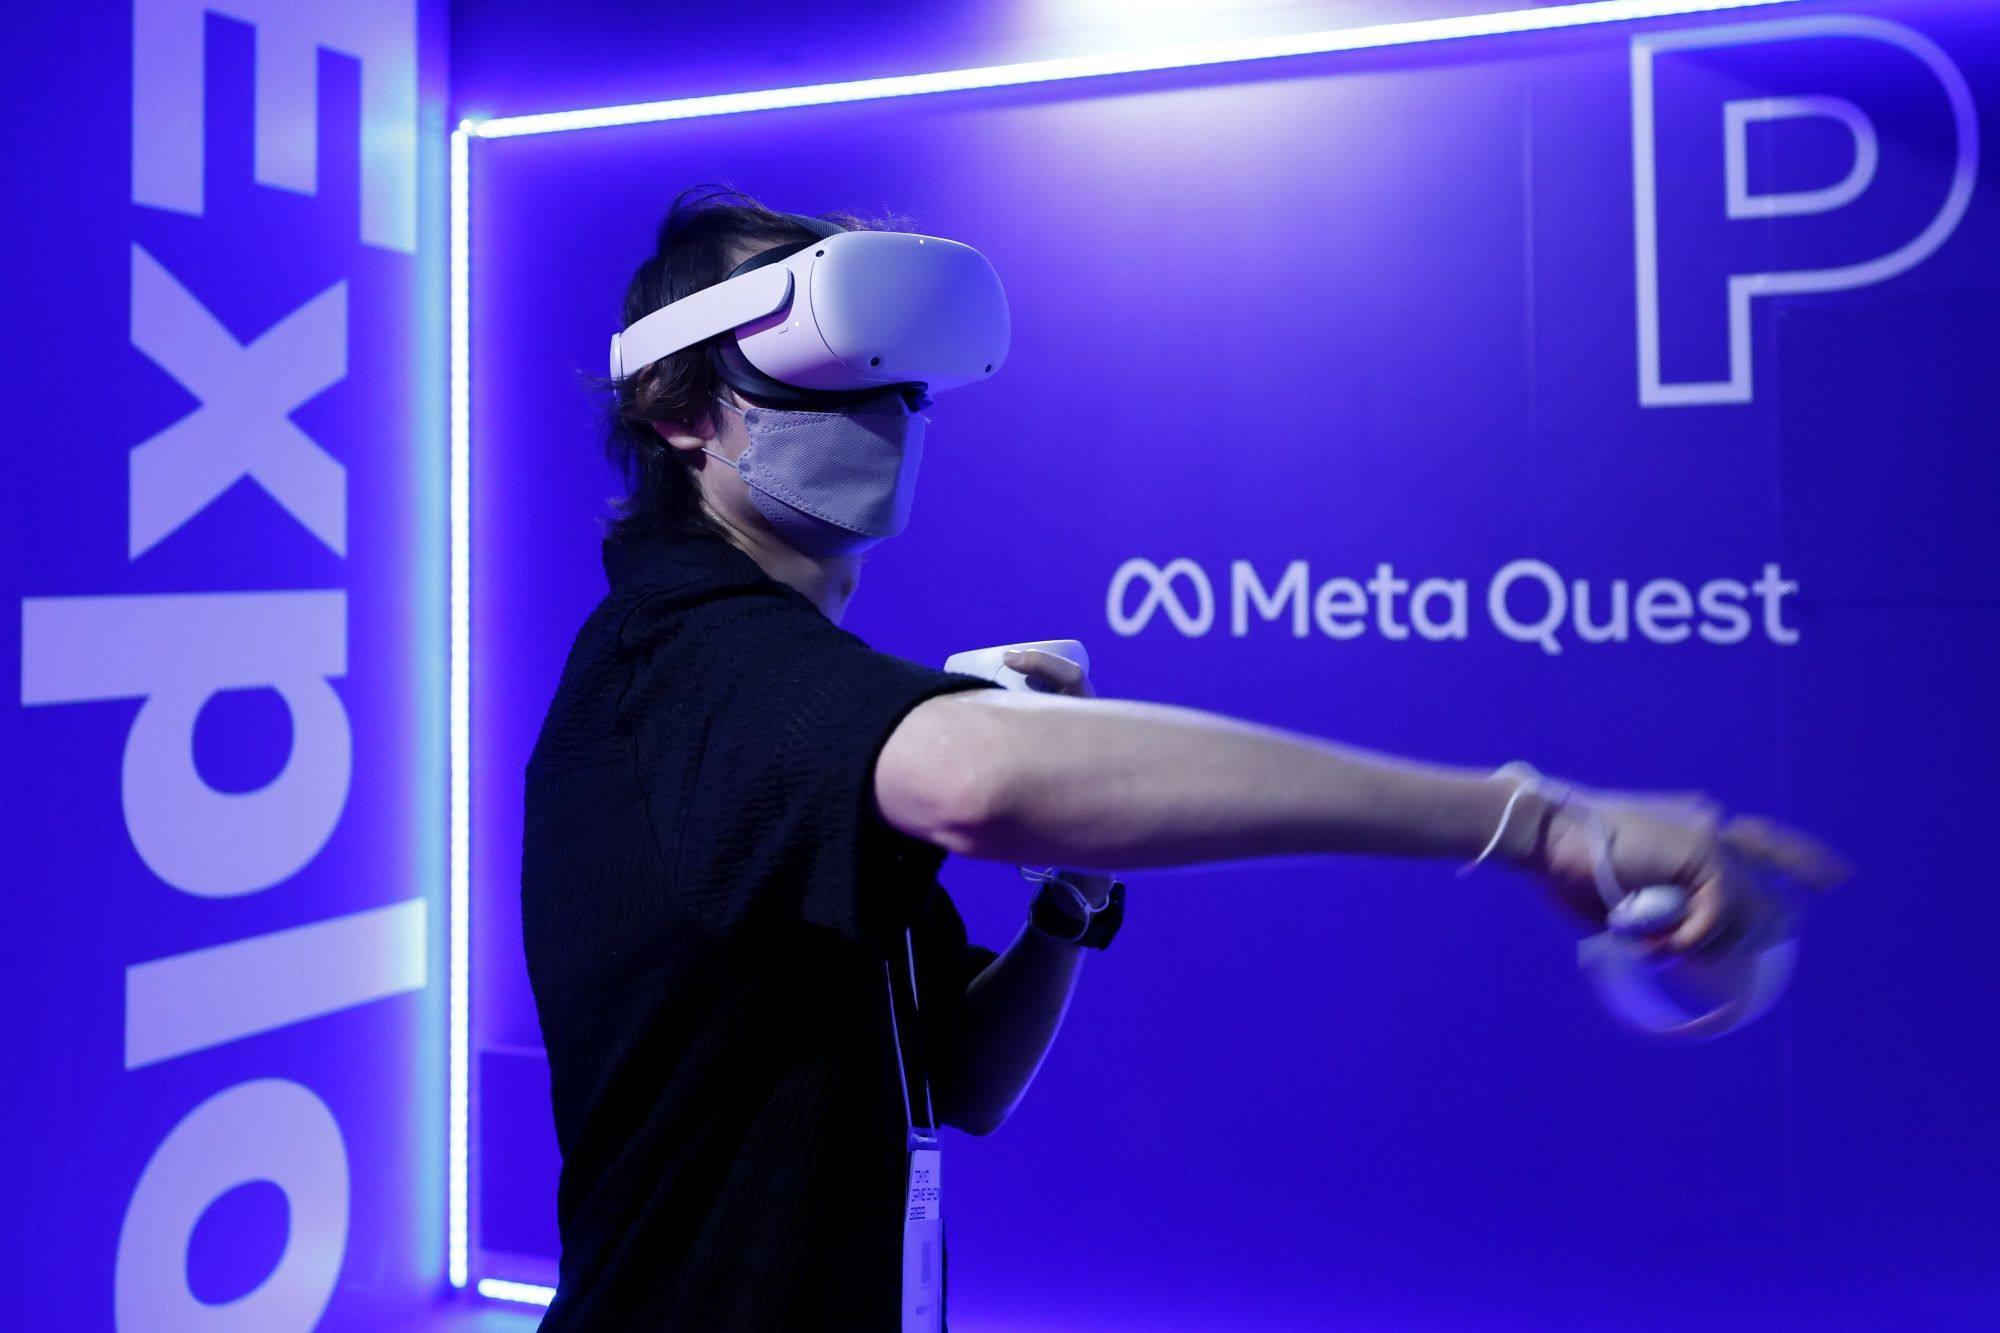 Facebook Owner Meta Plans to Call New Virtual Reality AR, VR Headset Quest  Pro - Bloomberg